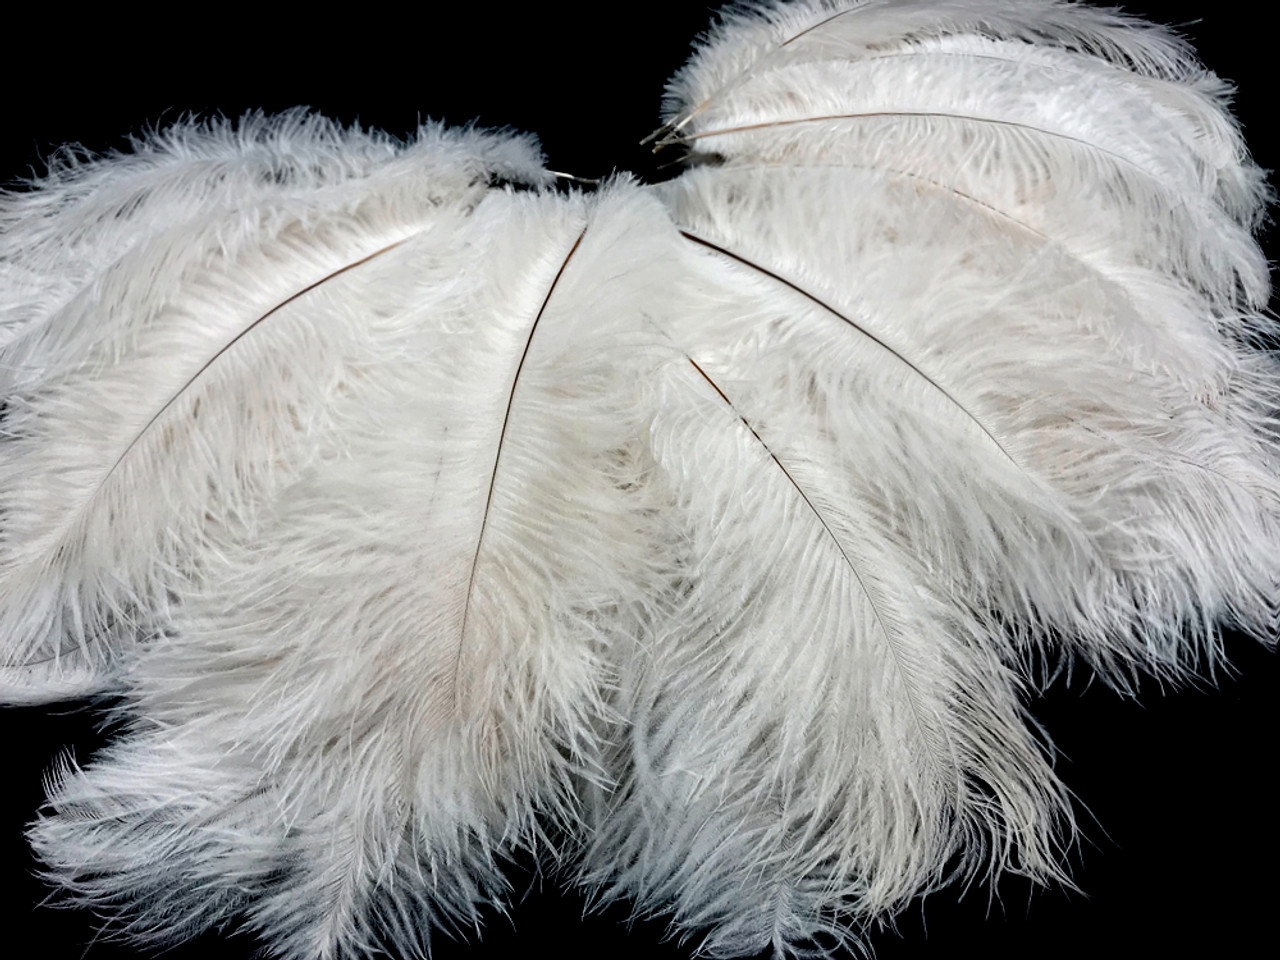 50Pcs/Lot White Ostrich Feathers for Crafts 15-70cm White Feather